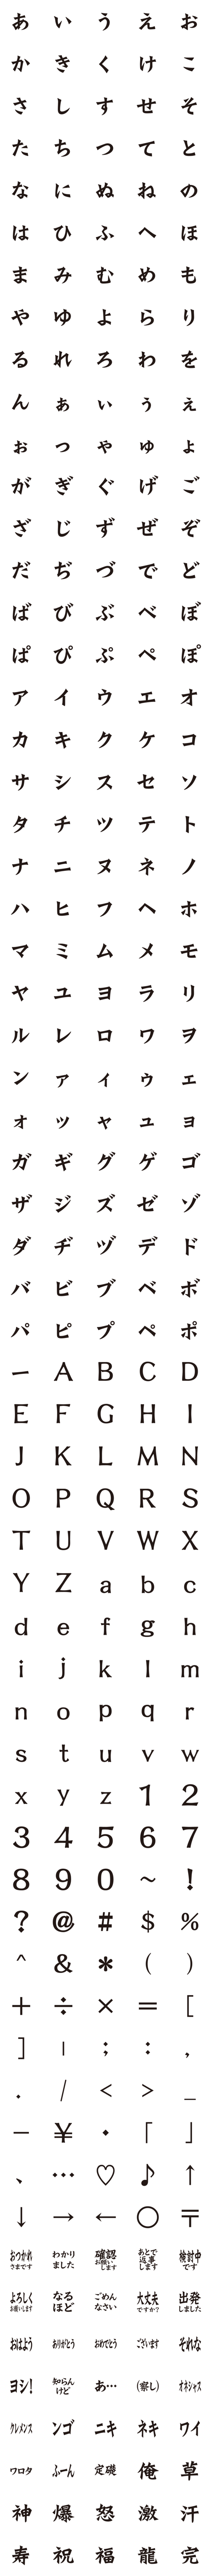 [LINE絵文字]DF龍門石碑体A フォント絵文字の画像一覧